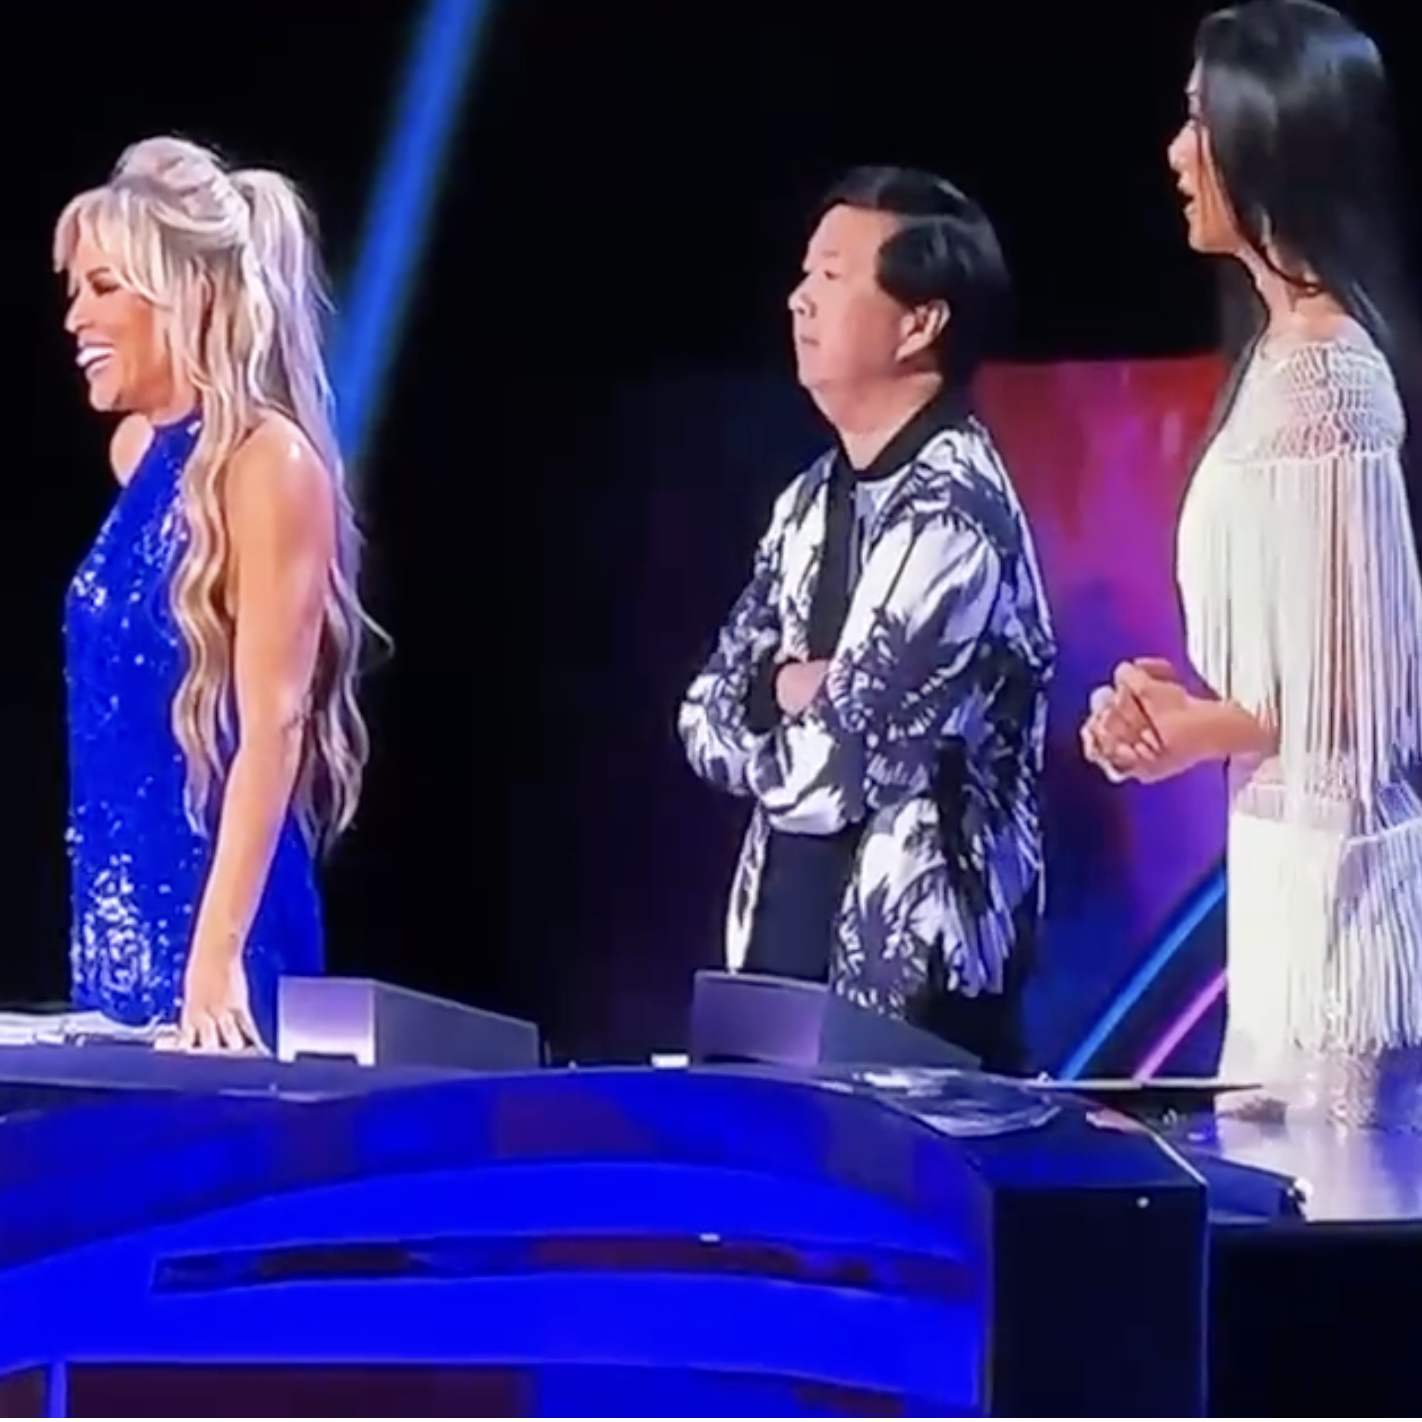 Watch Ken Jeong Walk Off Set After Rudy Giuliani Is Revealed on 'The Masked Singer'